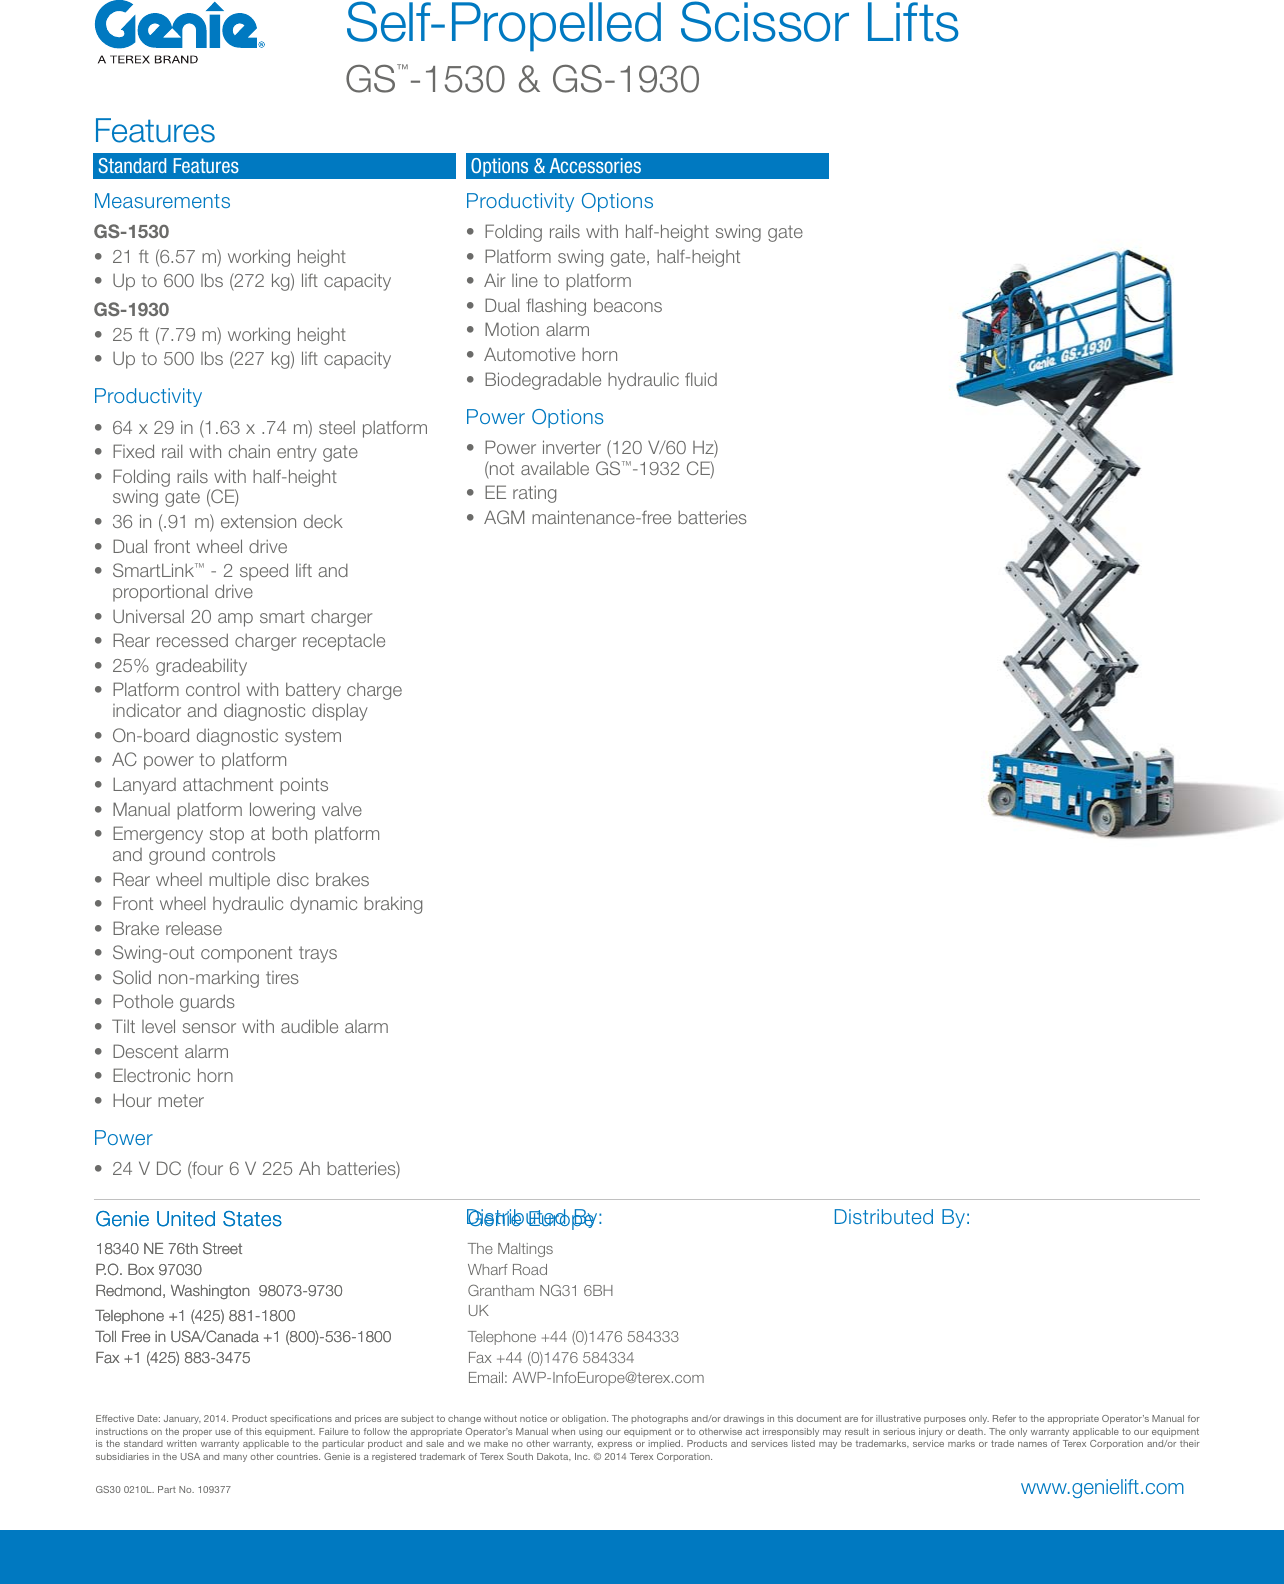 Page 2 of 2 - Genie Genie-Gs-1530-Product-Specifications- Scissors_Spec_1-22-14  Genie-gs-1530-product-specifications